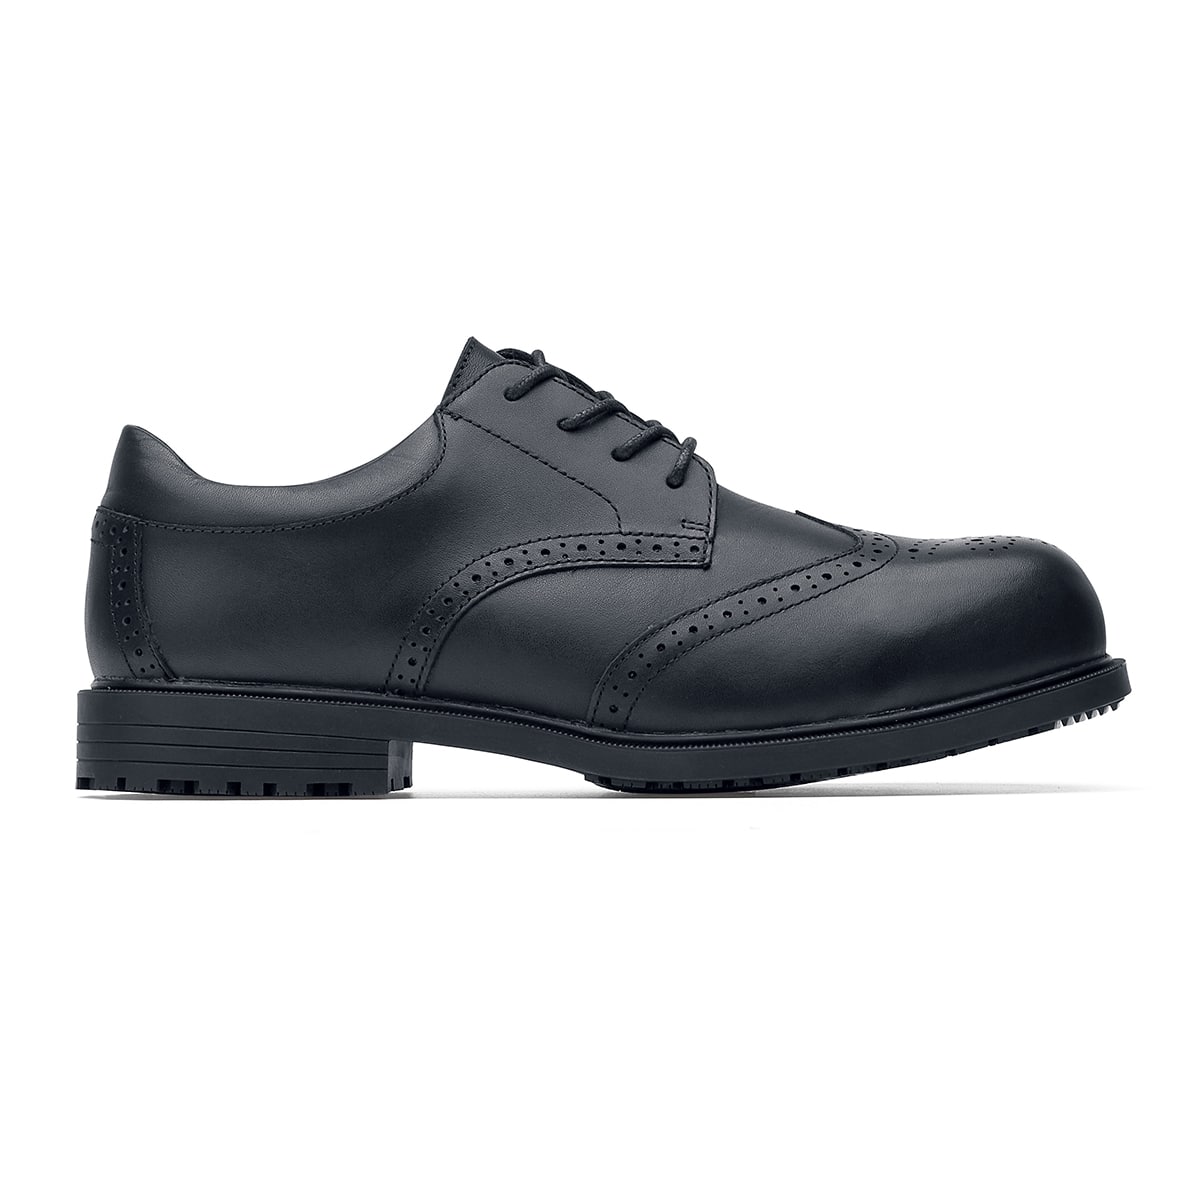 The Executive Wing Tip II ST from Shoes For Crews are formal slip-resistant safety shoes, made of leather and with a steel toe, seen from the right.